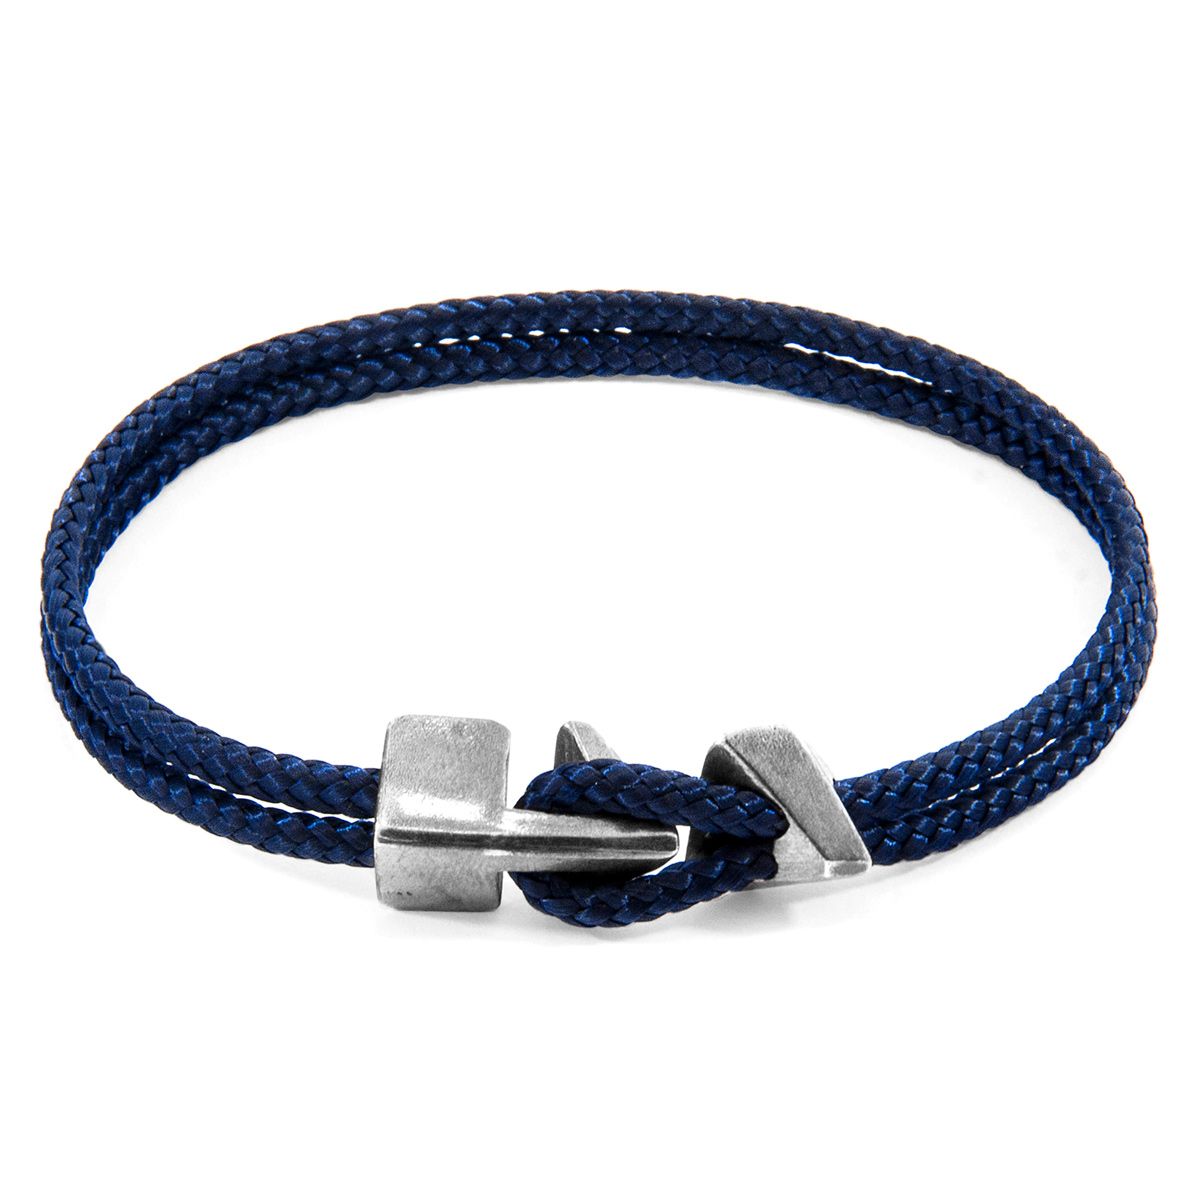 The Navy Blue Brixham Silver and Rope Bracelet was both designed and skilfully handcrafted completely in Great Britain, In Quality We Trust. For the Modern Journeyman (and woman), ANCHOR & CREW takes ownership of an exploratory lifestyle and enjoys the Happy-Good Life. Combining British craft manufacturing with a discerning modern-minimalist style, this ANCHOR & CREW bracelet features:

3mm diameter performance Marine Grade polyester and nylon rope (GB) 
Secure solid .925 sterling silver facetted arrow-shaped clasp and matching angled clamp (GB) 
SIZING
This bracelet is available in four bracelet lengths, 17cm, 19cm, 21cm or 23cm in circumference. To take the bracelet on or off your wrist, simply (un)hook the loop from beneath the arrow-shaped clasp and slide the matching angled clamp for added security.